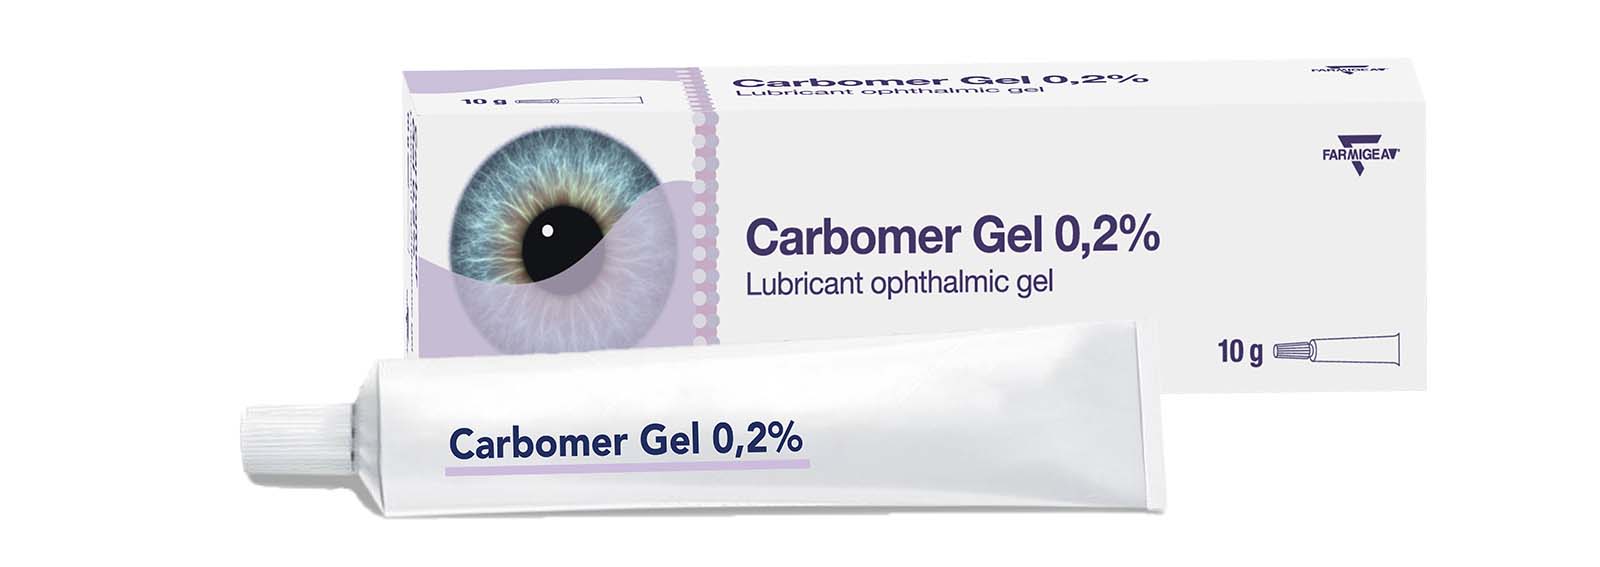 carbomer, gel, ophthalmic, gel, private label